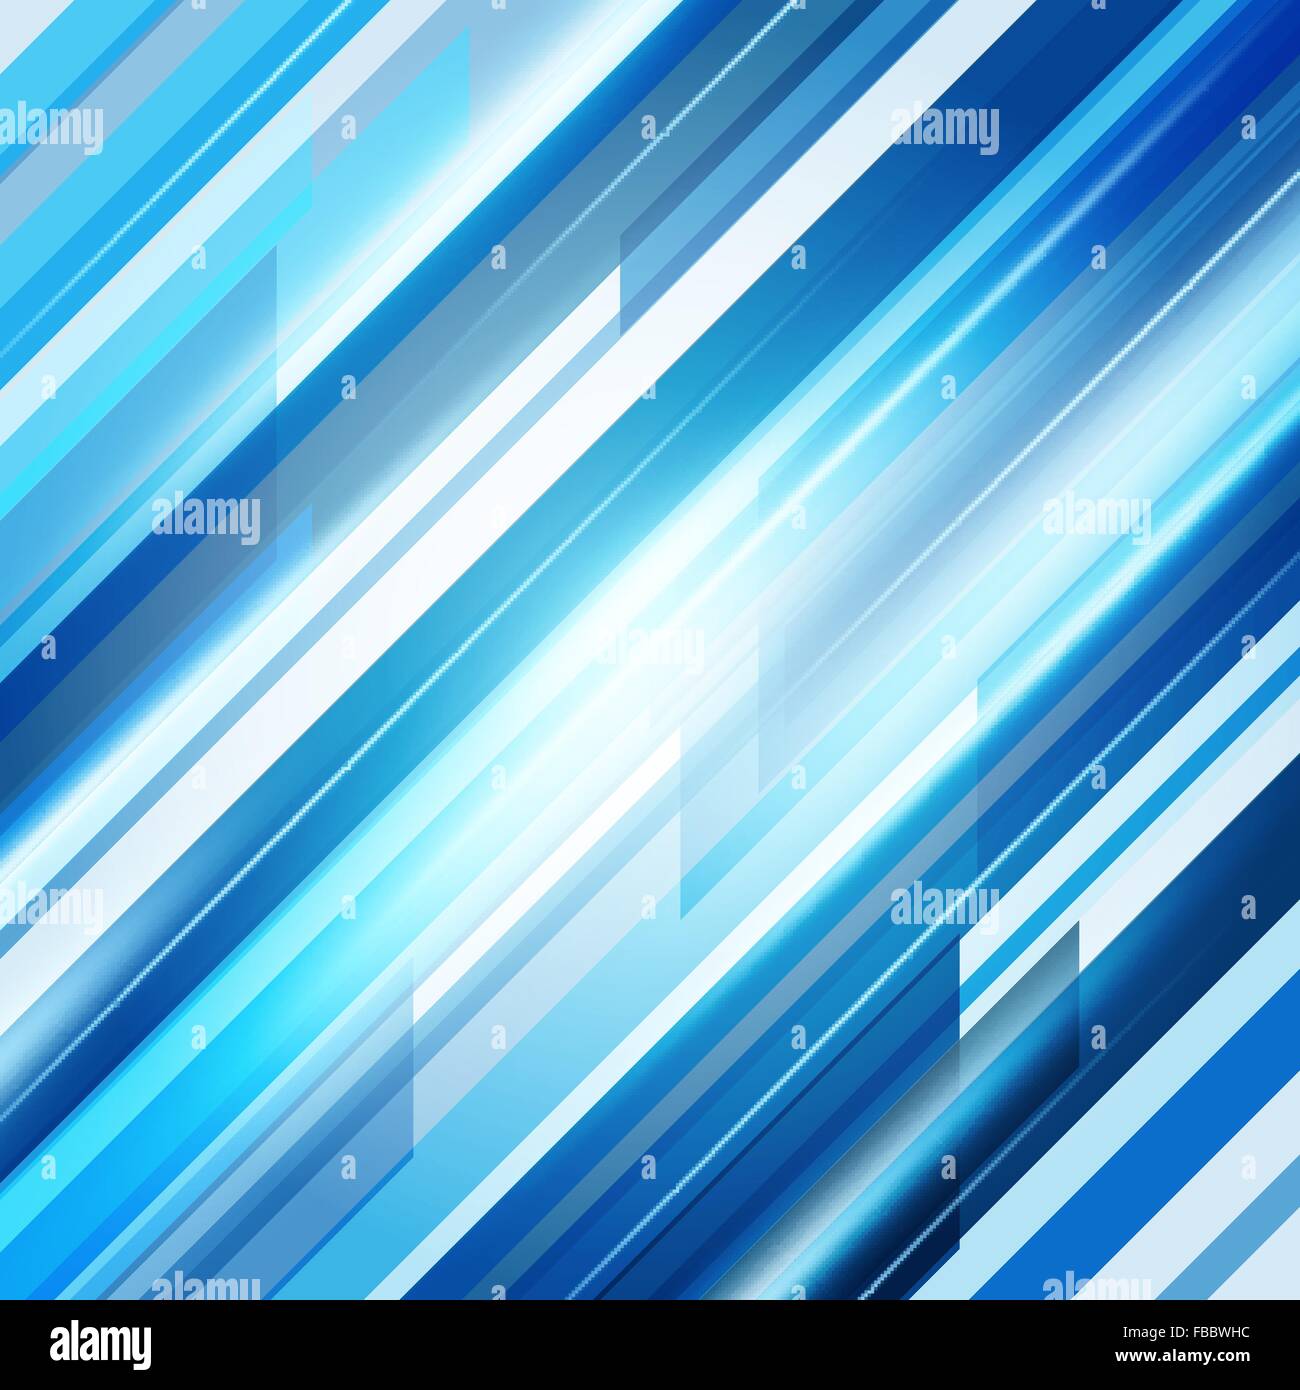 Blue Abstract Straight Lines Background. Vector Illustration Stock Vector